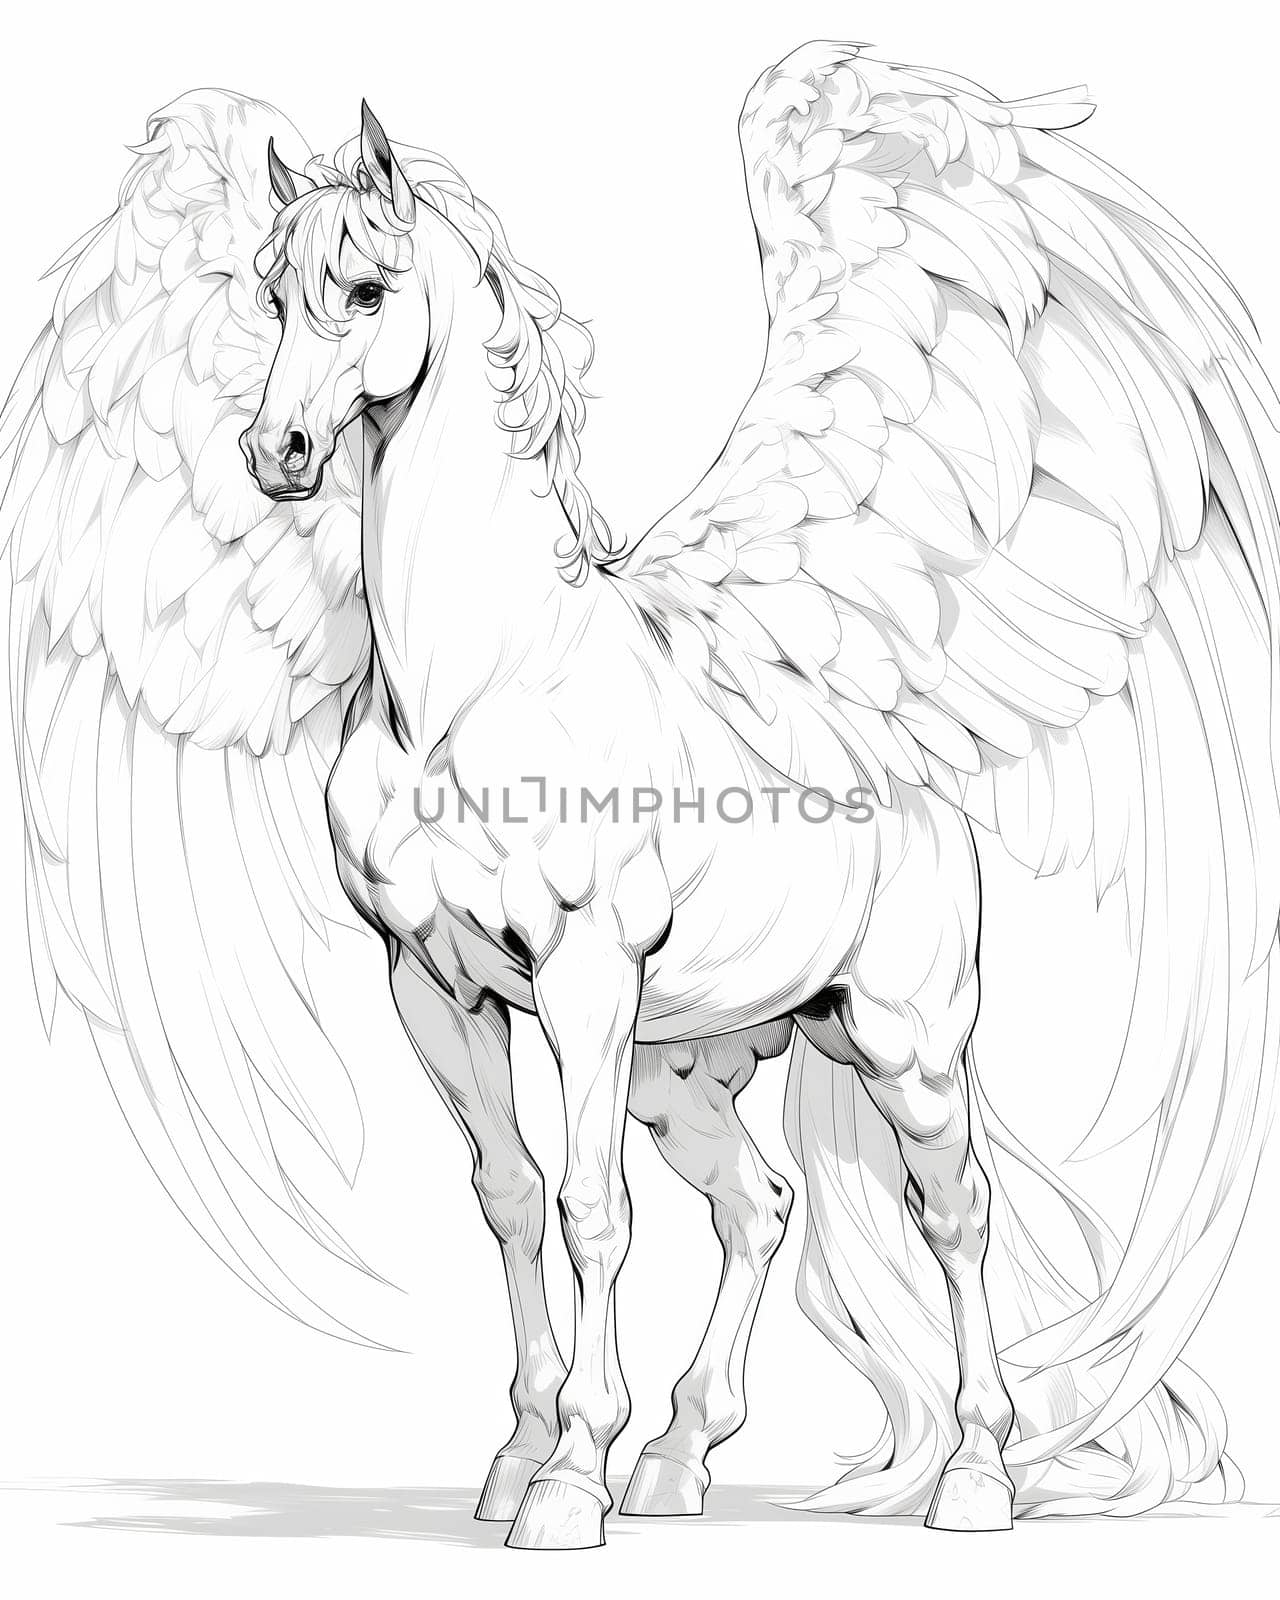 Coloring book for kids, animal coloring, pegasus, unicorn. by Fischeron